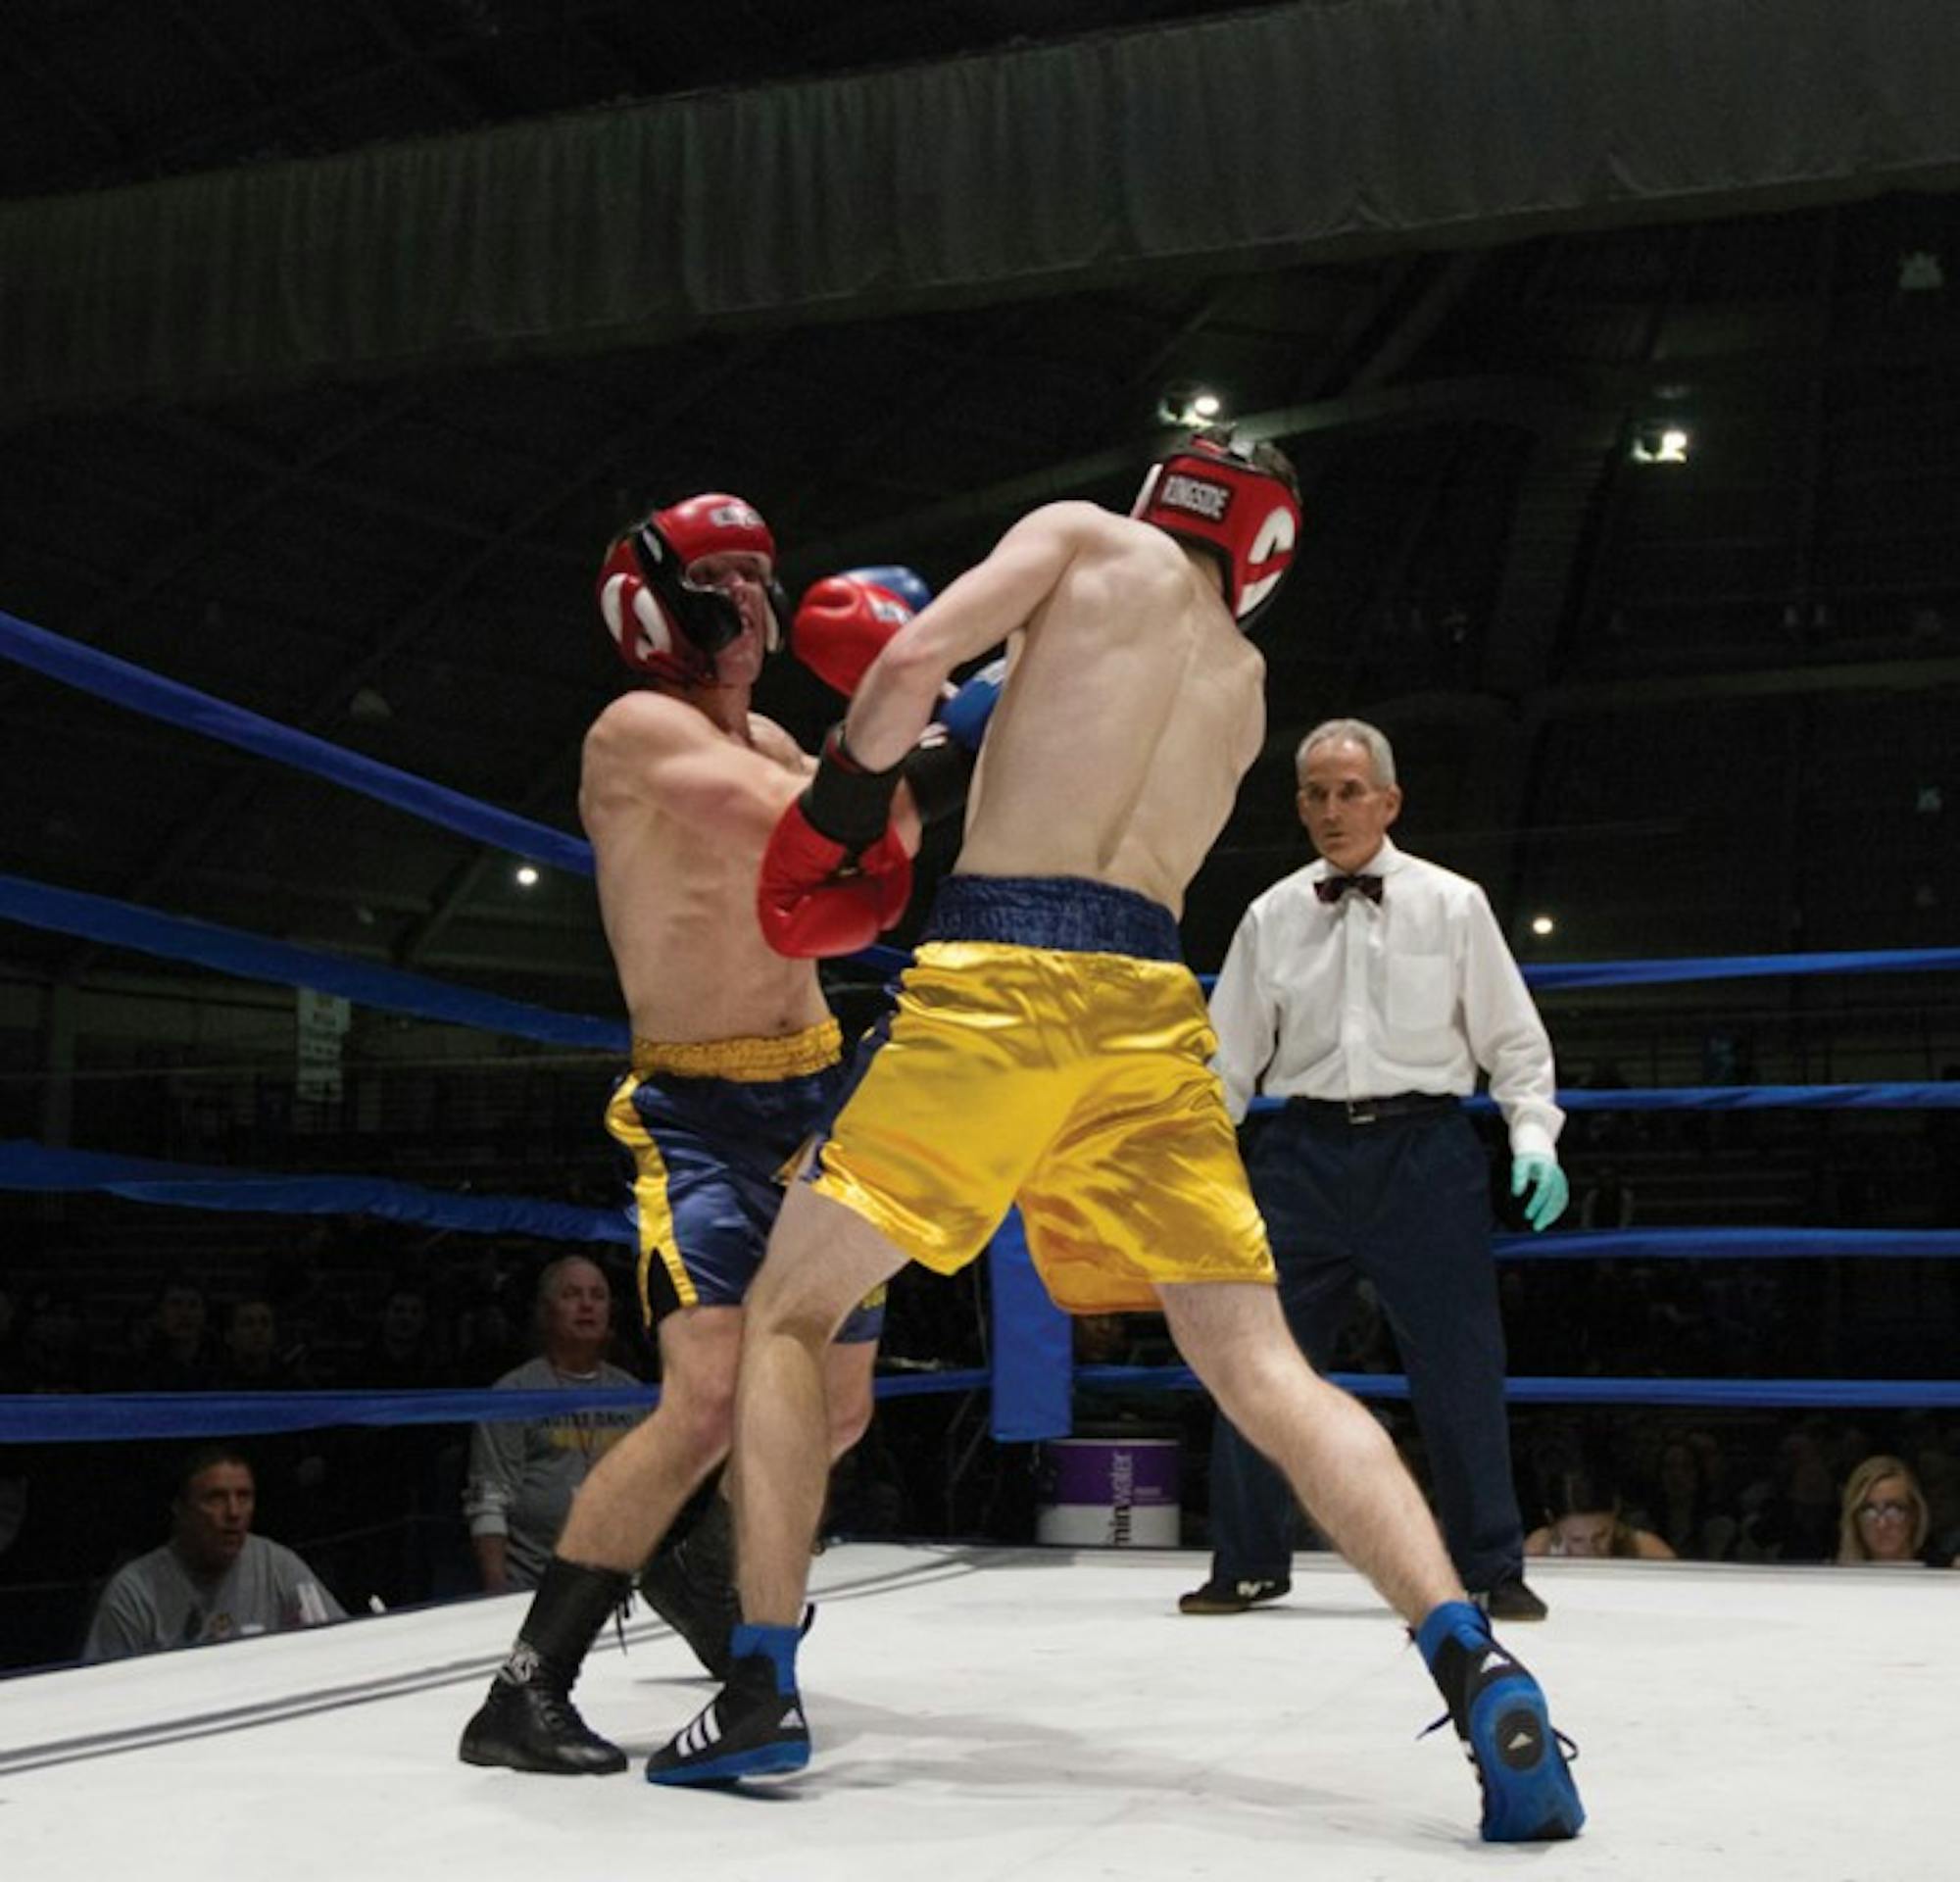 Senior captain Niels Seim, left, punches his way past the defense of freshman Patrick Brennan, in the semifinal round.